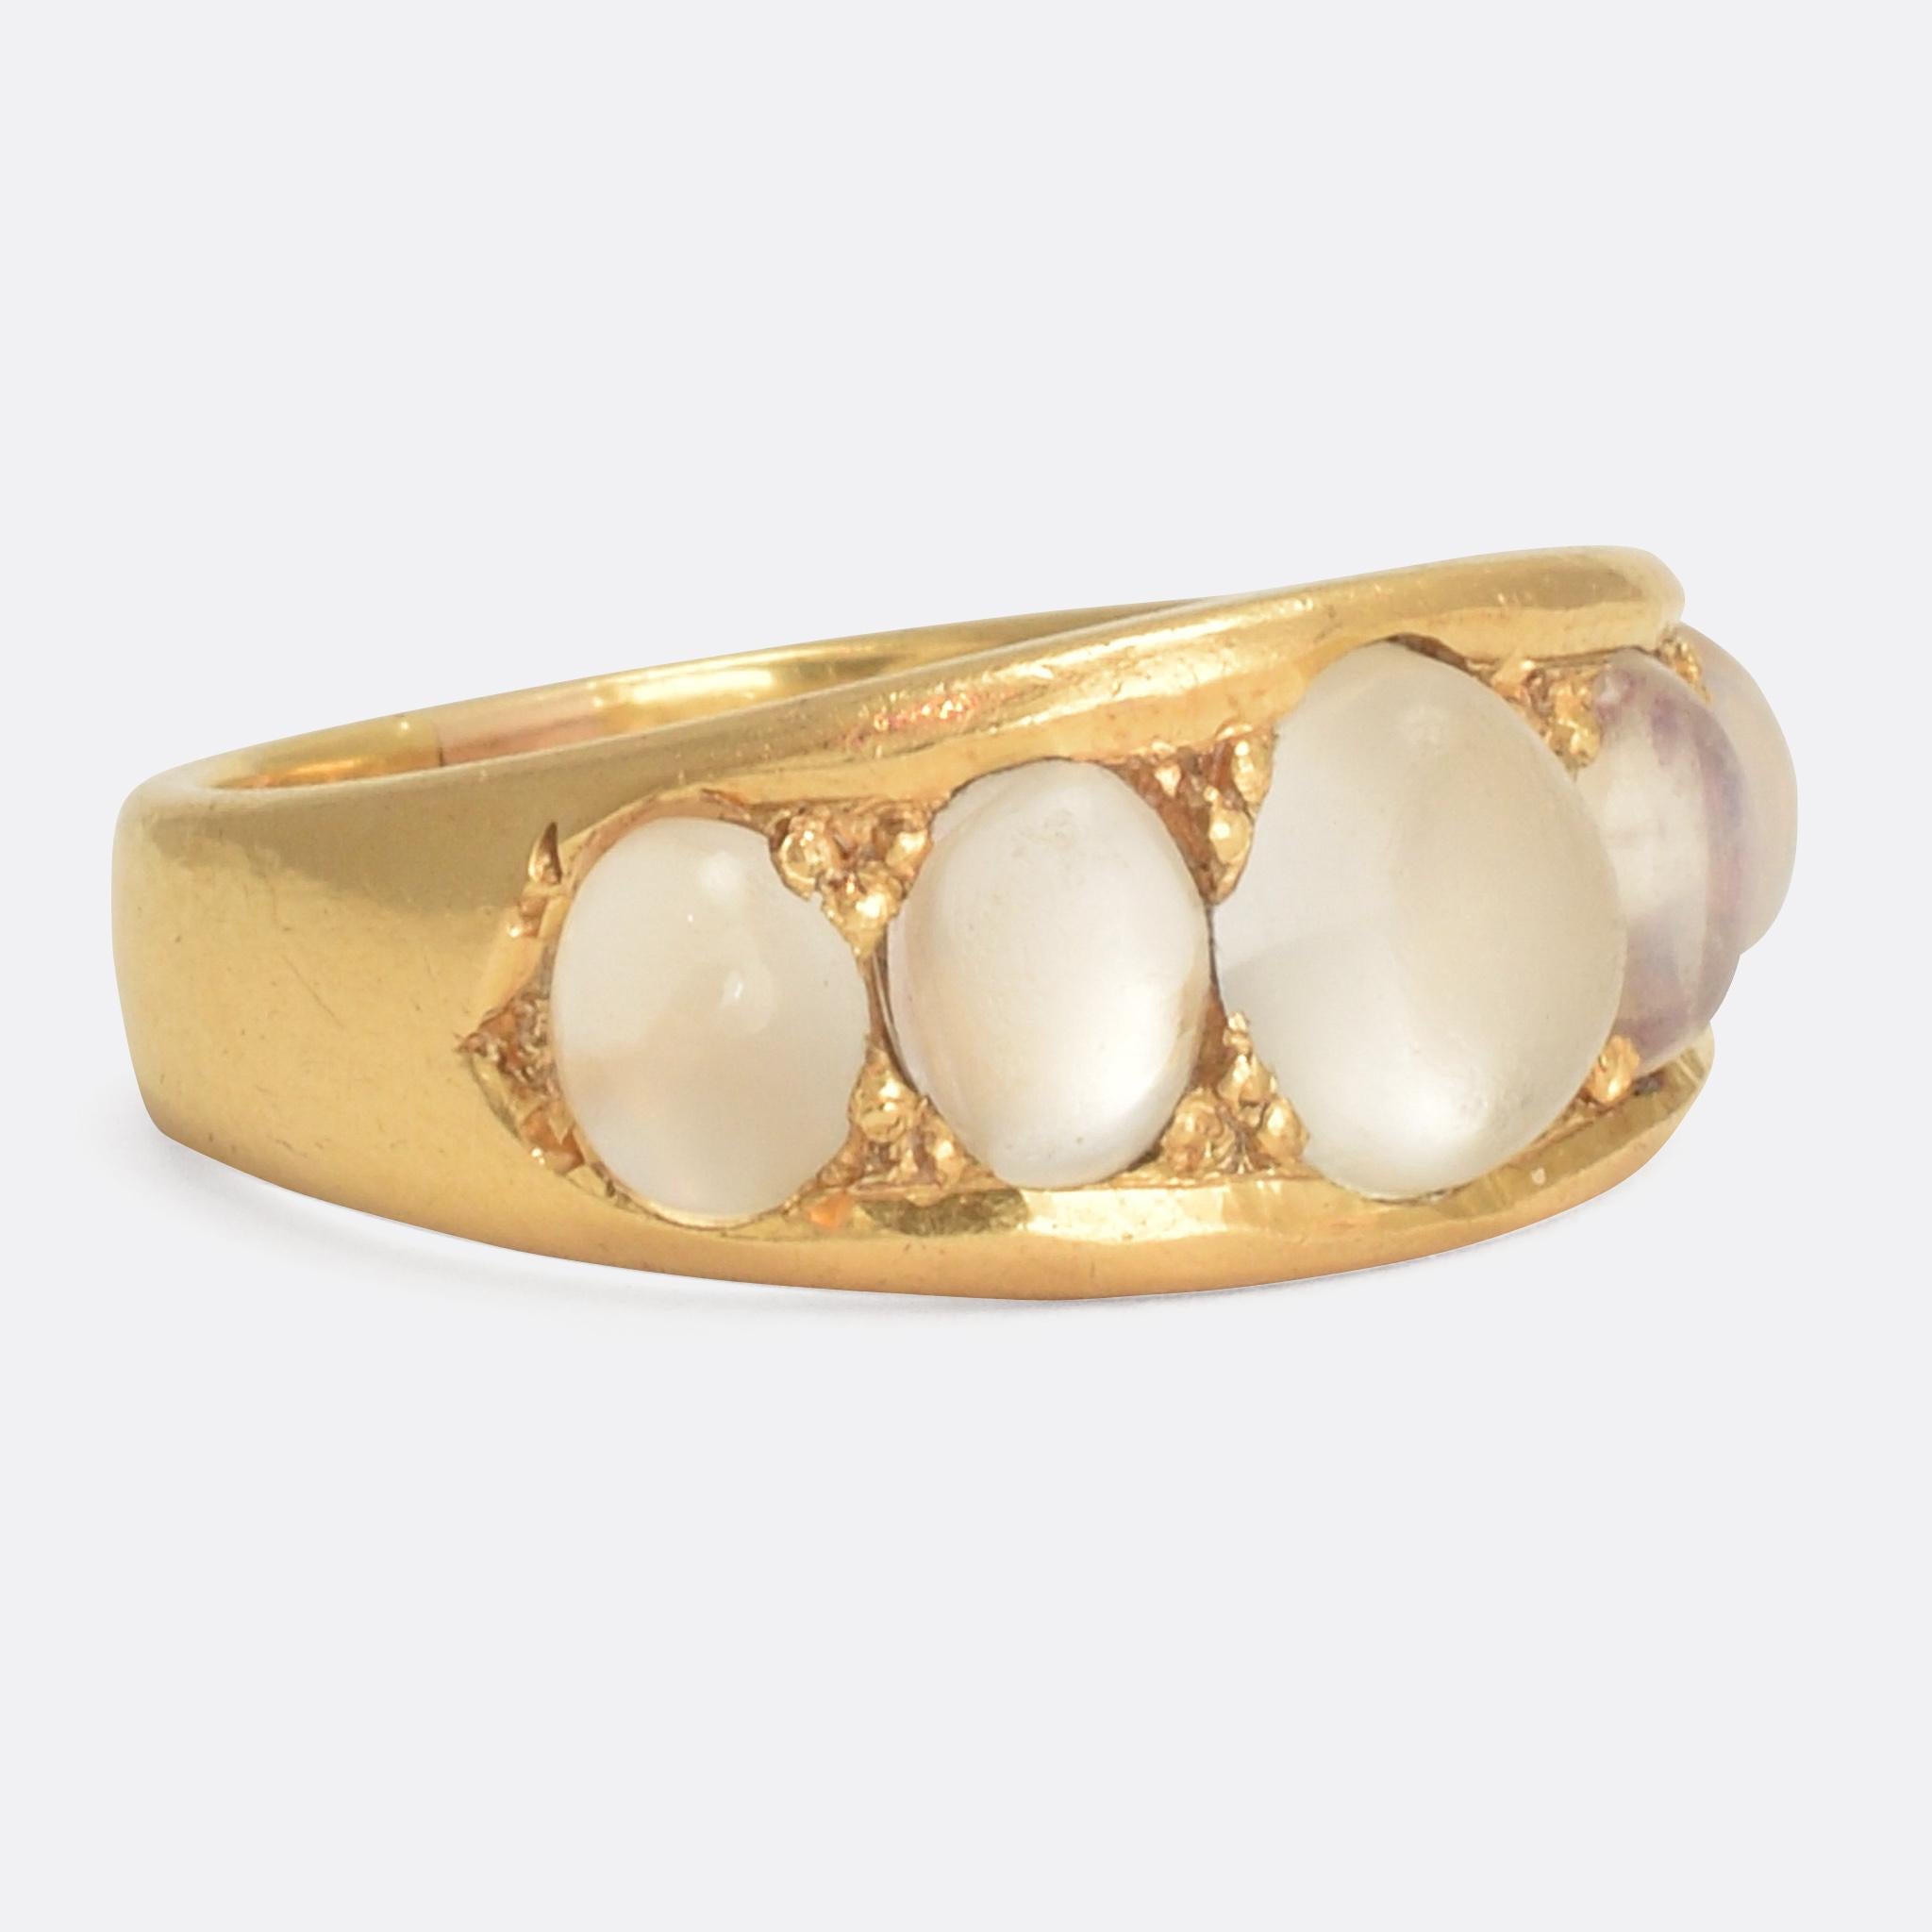 A fine 18k gold gypsy ring set with five graduated moonstones. It has a good substantial feel, and is particularly well made. Dating from the late Victorian era, circa 1890; the moonstone display excellent adularescence - the effect whereby light